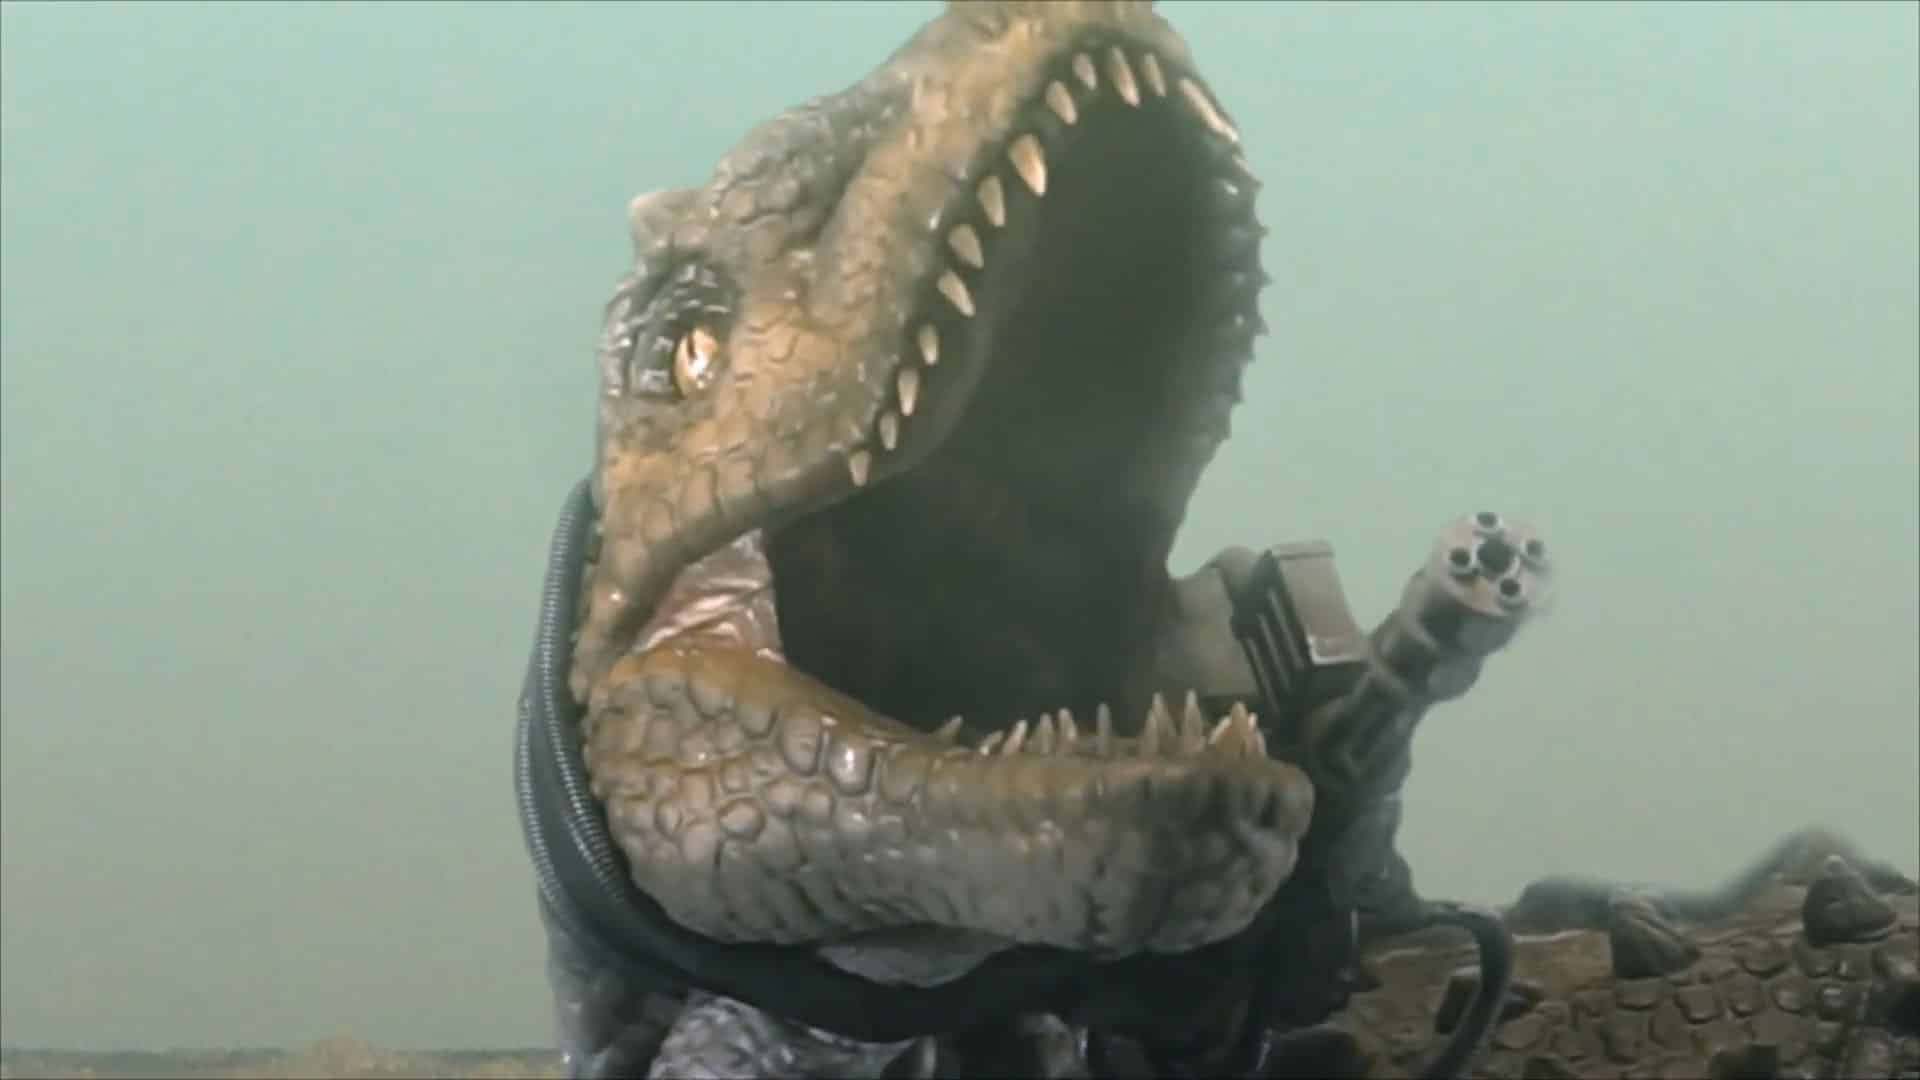 This Jurassic Thunder Movie Trailer is Torture But We Can’t Stop Watching